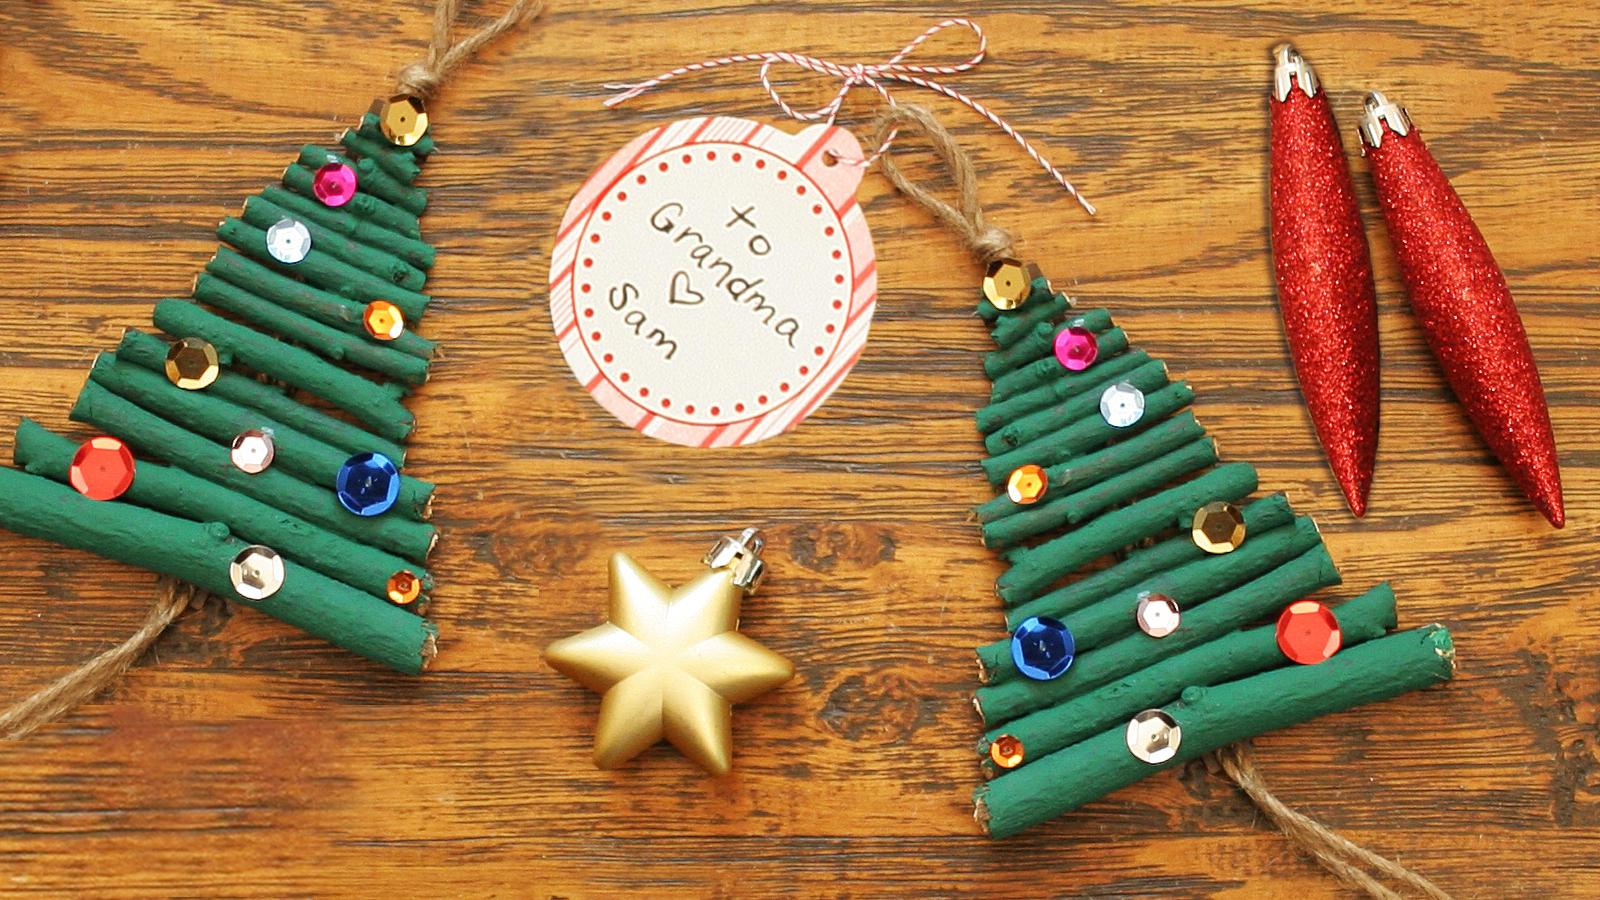 Try Our Christmas Tree Craft